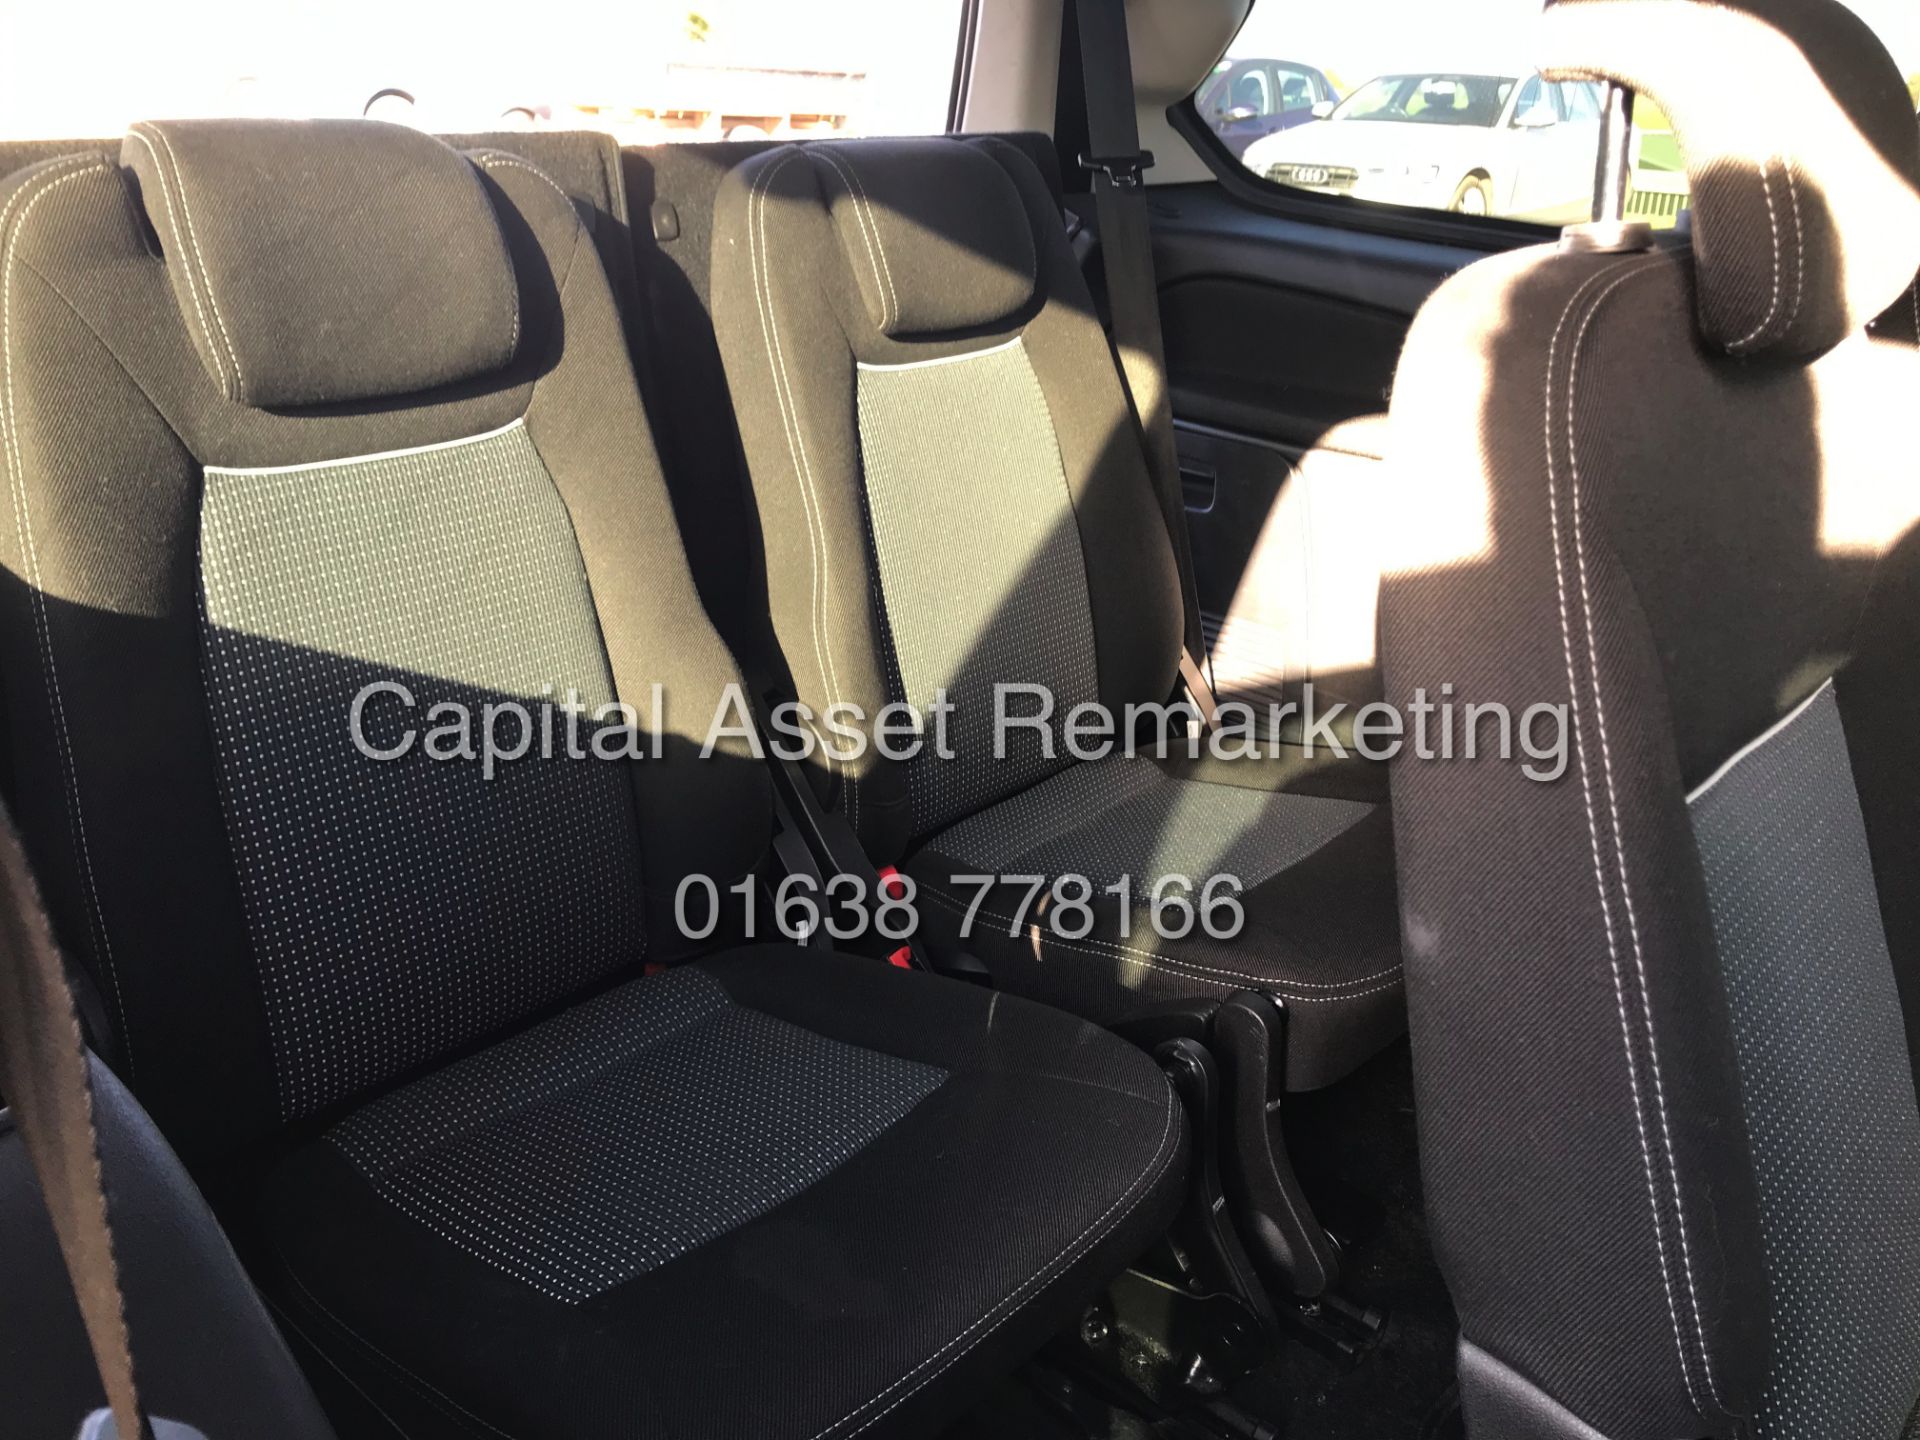 On Sale FORD GALAXY 2.0TDCI "POWER-SHIFT" 7 SEATER (15 REG) 1 OWNER - 140BHP - AIR CON - ELEC PACK - Image 19 of 20